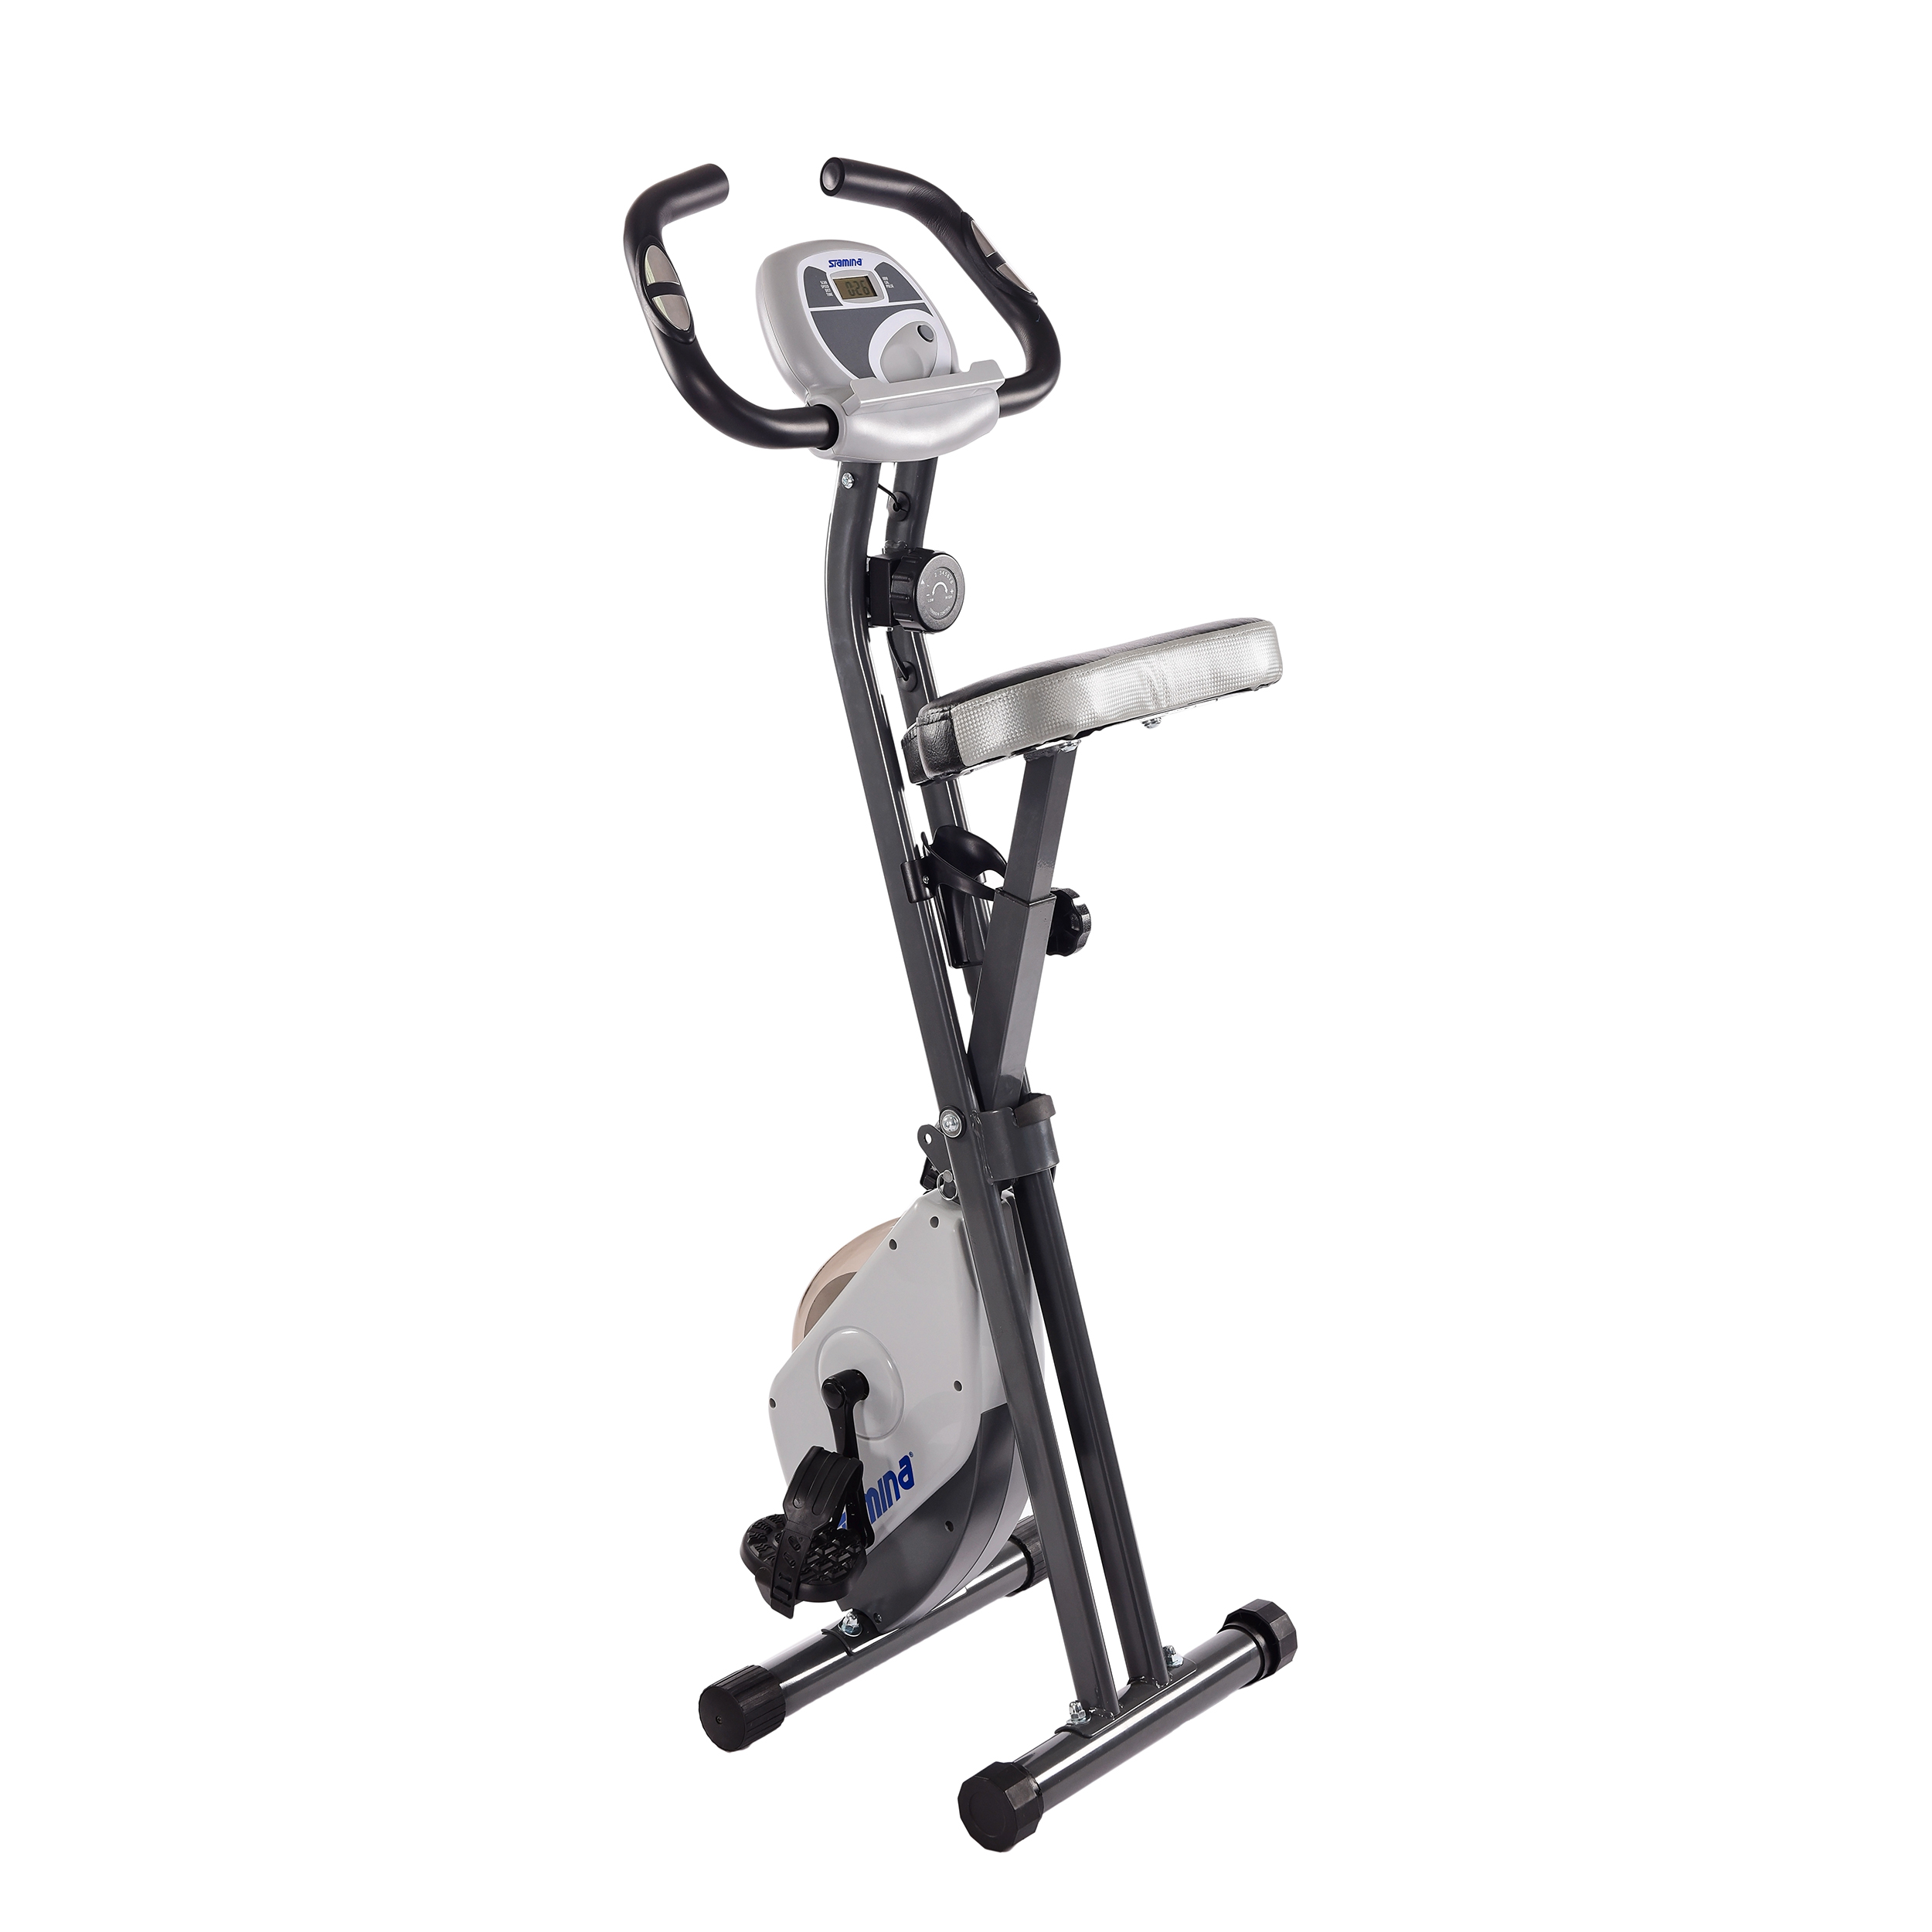 Stamina Folding Cardio Upright Exercise Bike with Heart Rate Sensors and Extra Wide Padded Seat - image 5 of 8